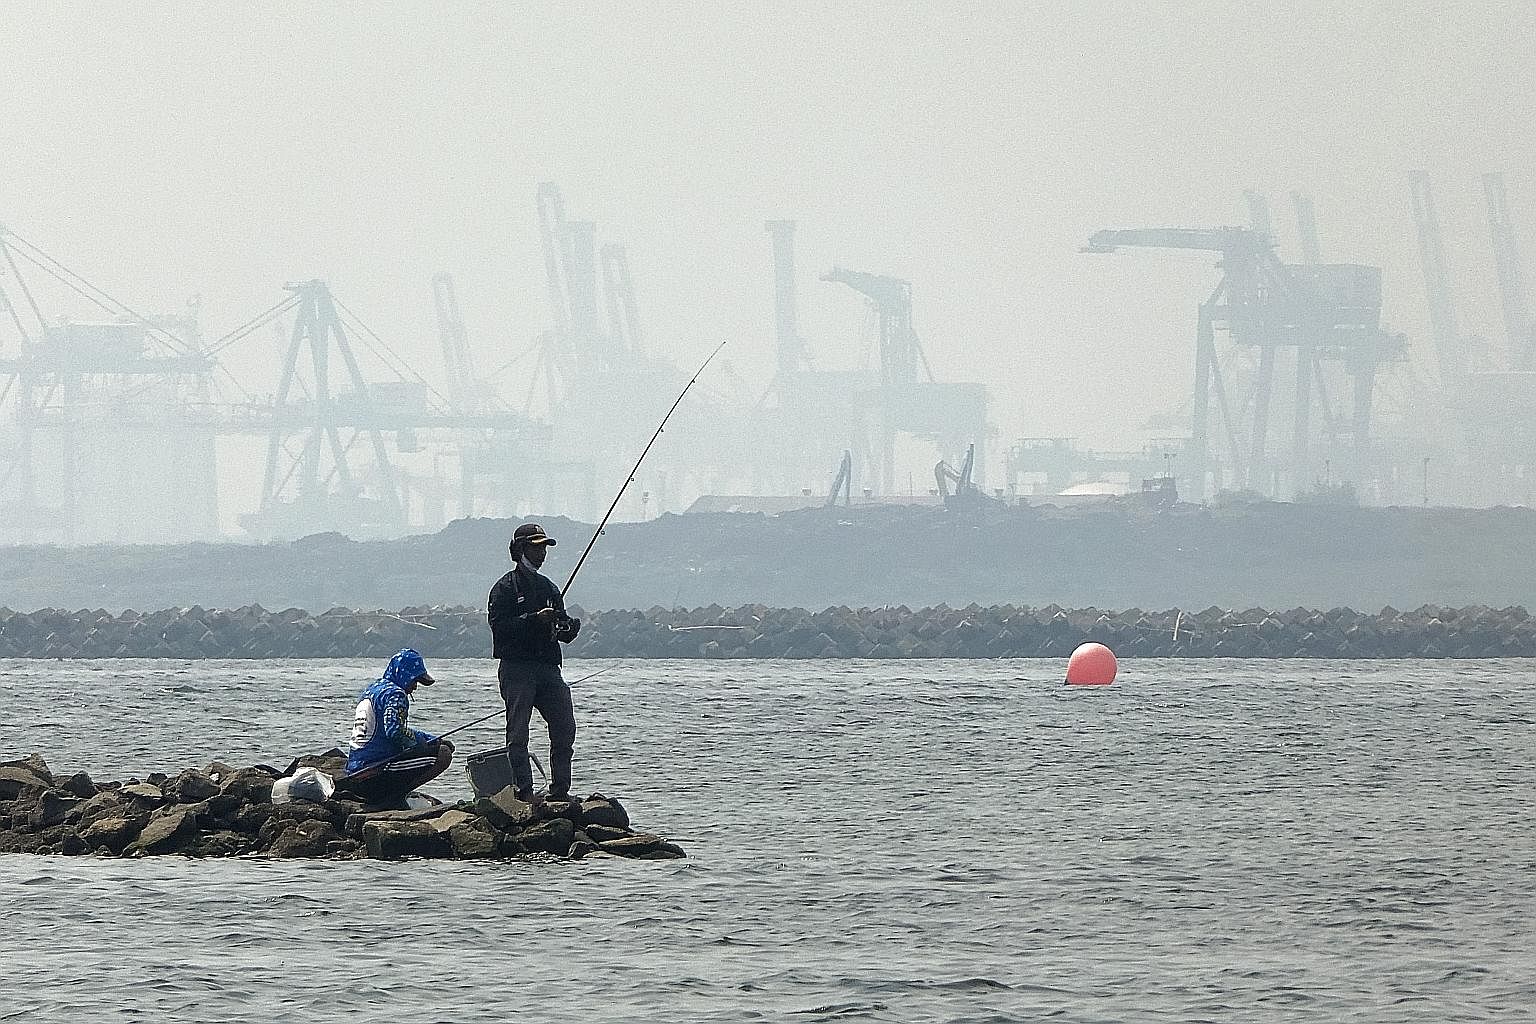 A coastal area of Jakarta shrouded in thick haze last month. If a haze crisis occurs while South-east Asia and the world are still fighting the pandemic, it would compound the strain on public health resources, the writers say, stressing the need to 